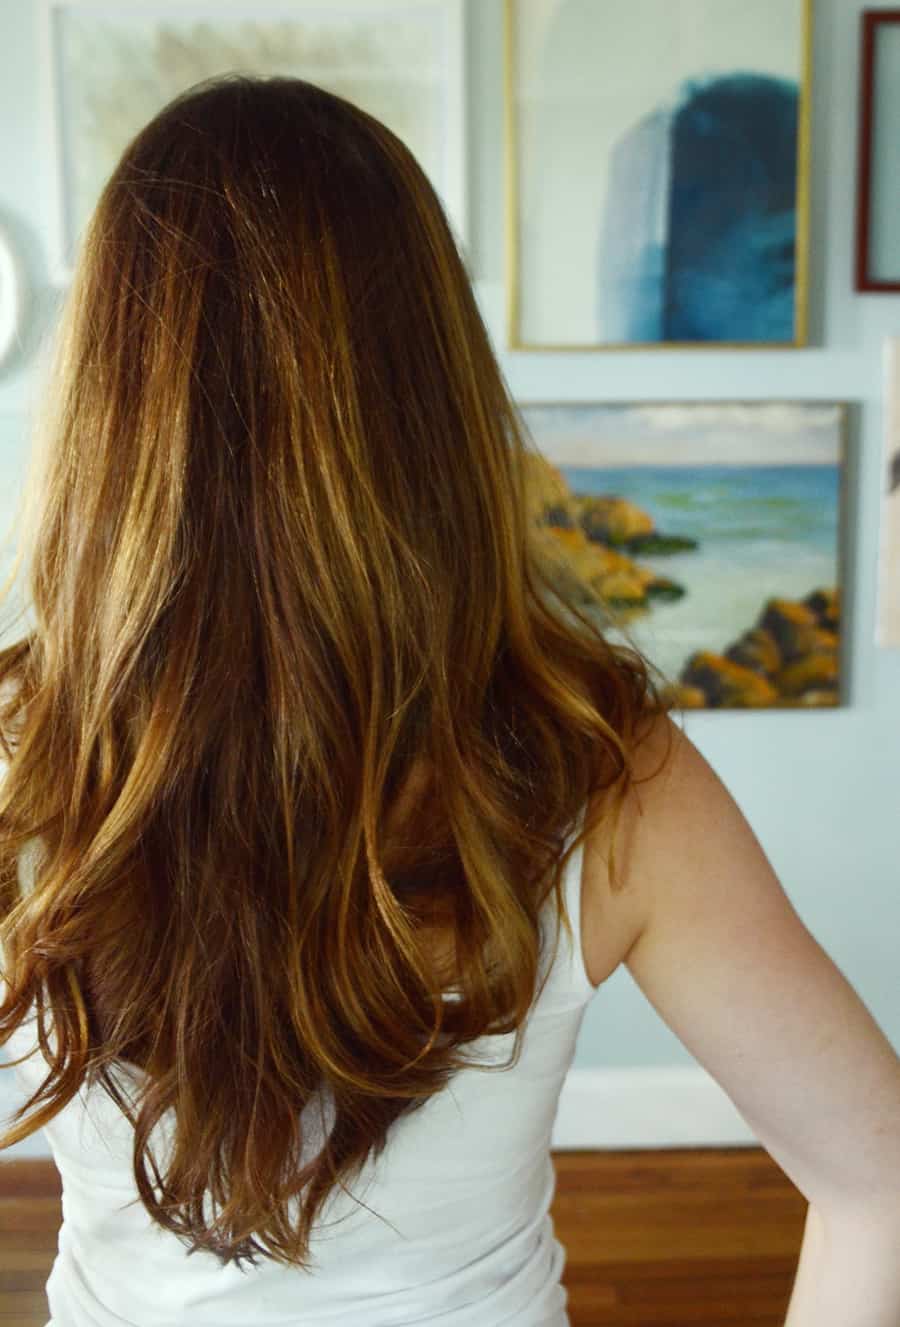 Create Beachy Waves In Your Hair With A Curling Wand